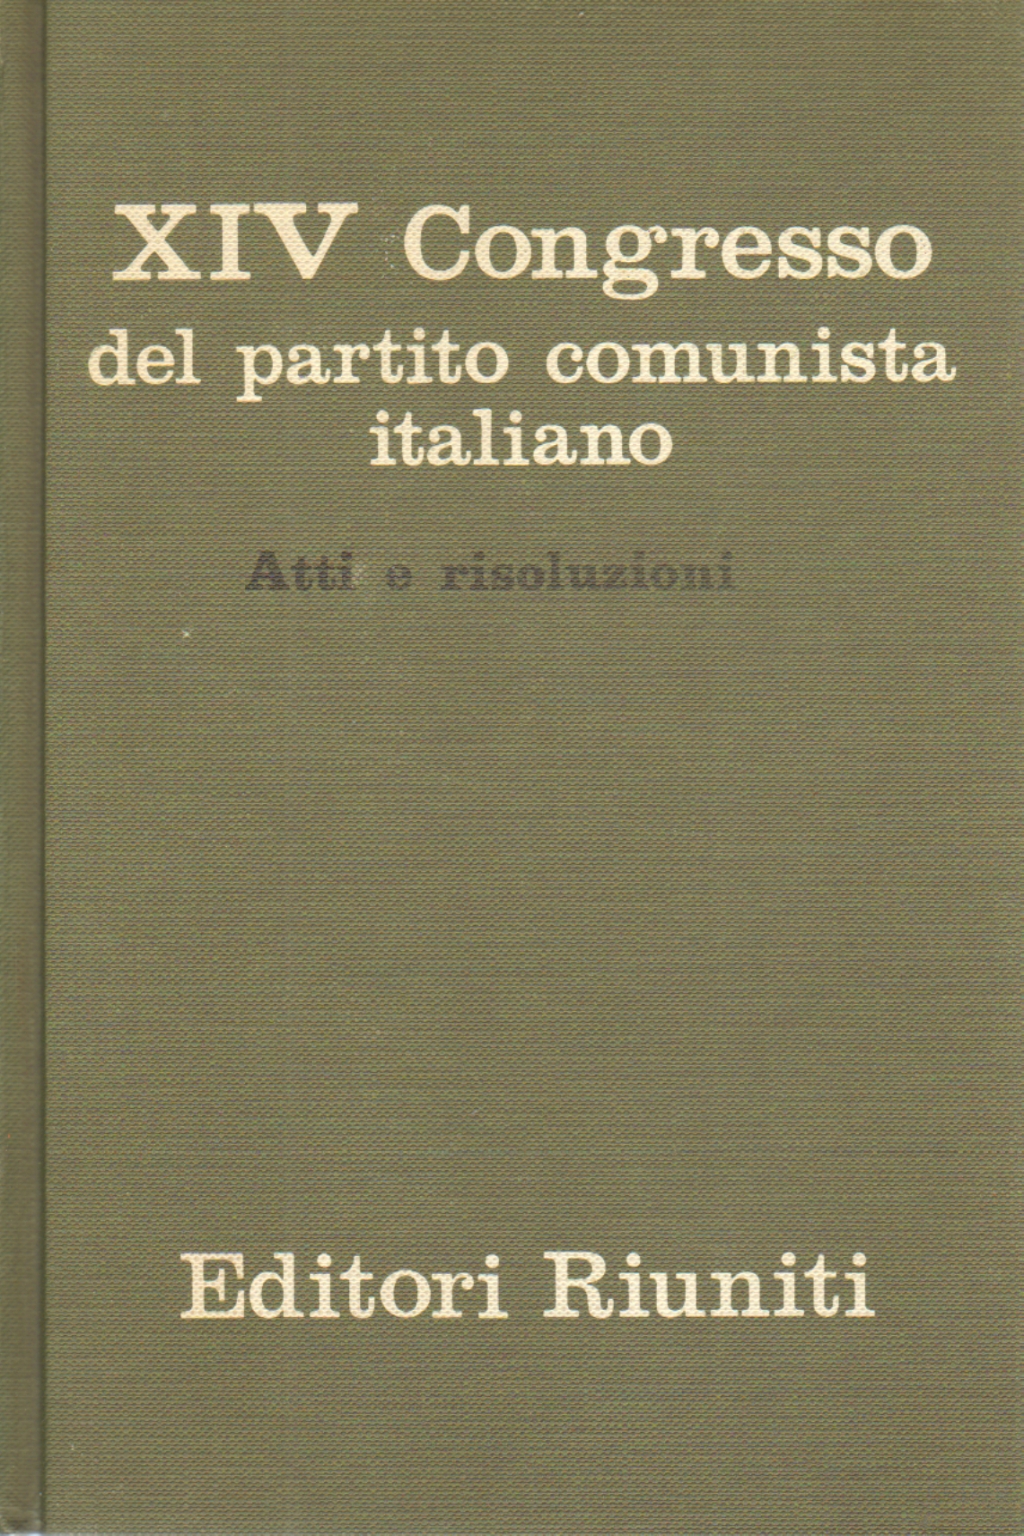 XIV Congress of the Italian Communist Party - Proceedings and resolutions | AA.VV. used Politics and society Ideologies and political theories